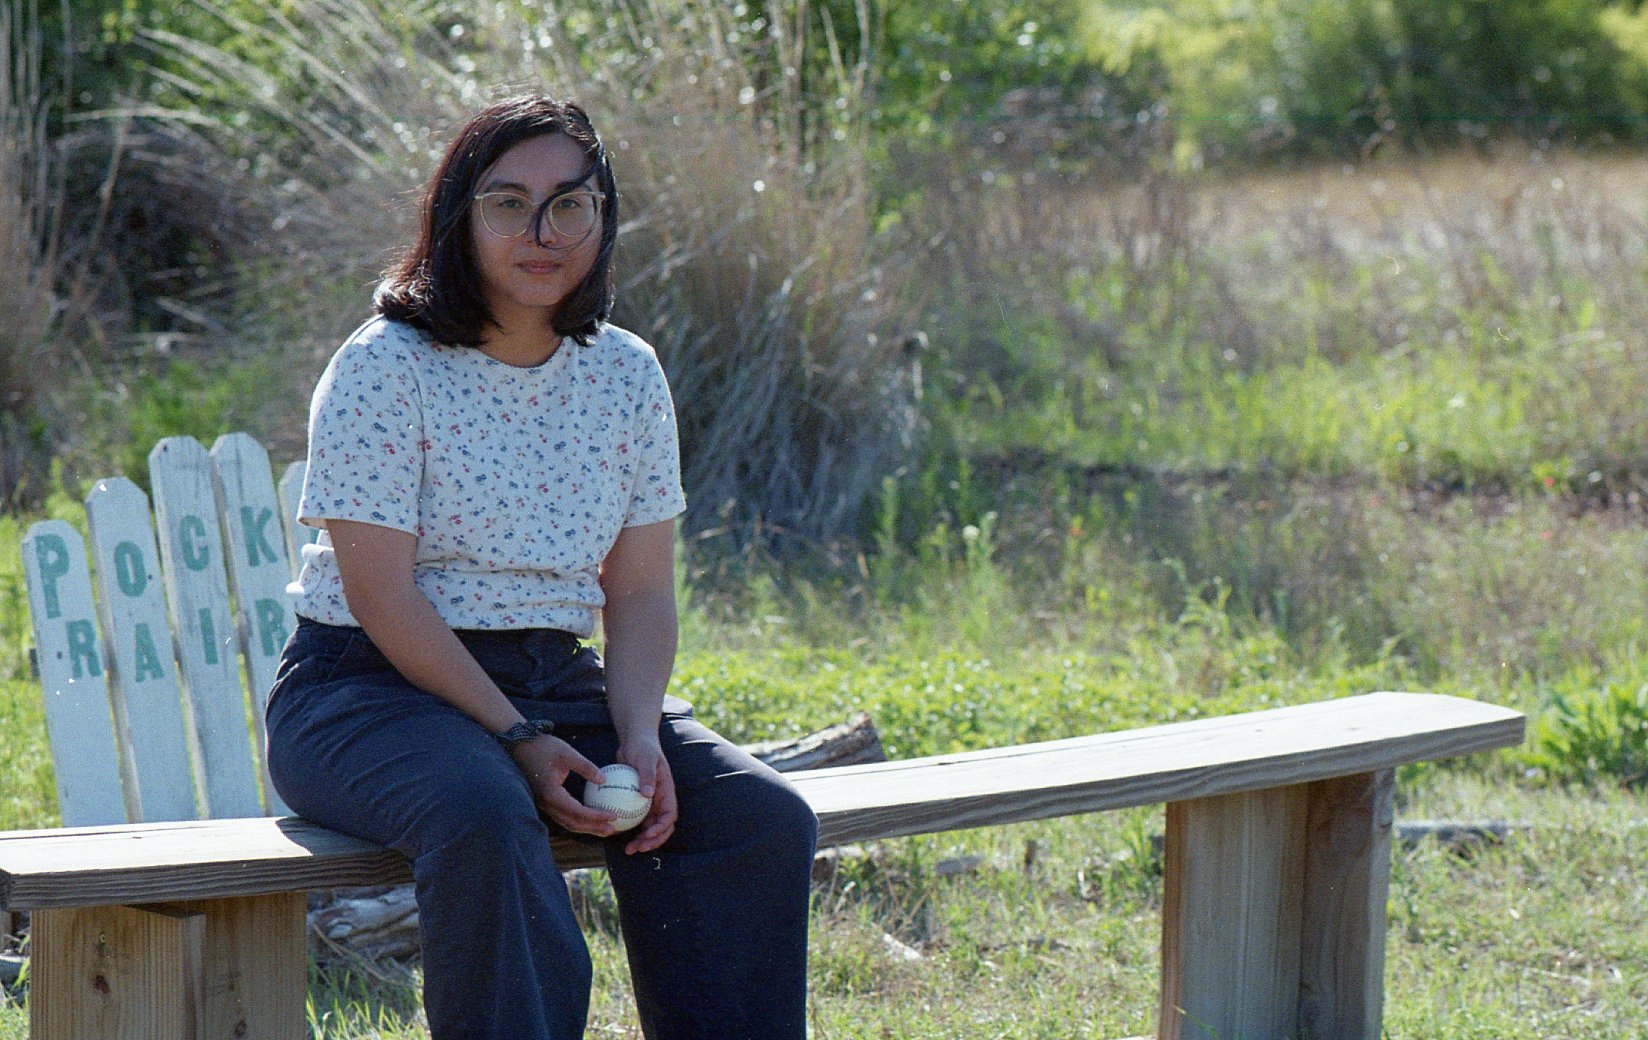 Singer-songwriter Alex Montenegro, who performs as Skirts, sits on a bench at one end on a sunny day, wearing a white shirt and jeans